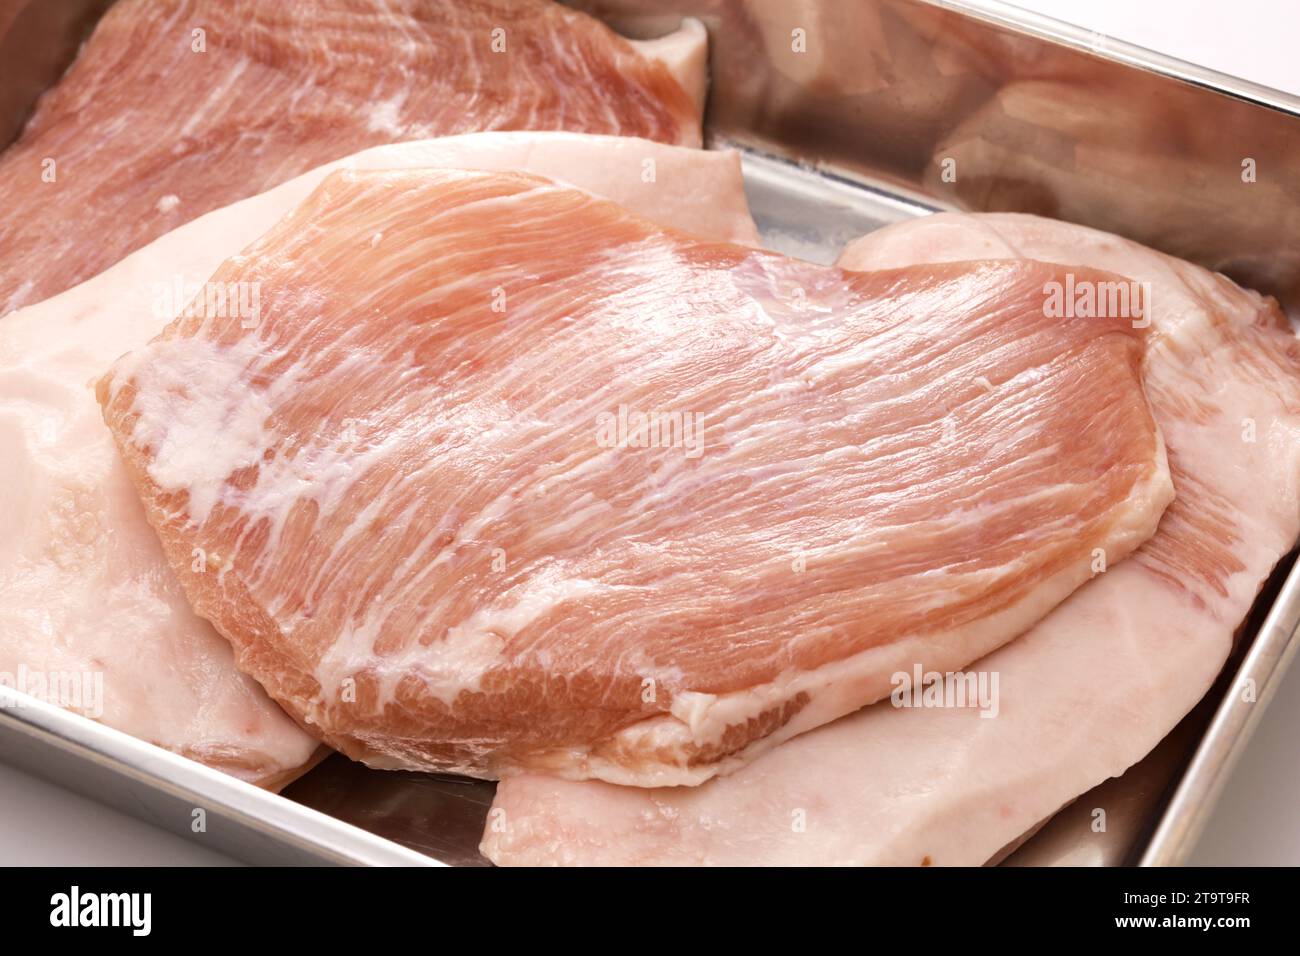 pork jowl meat in a butcher tray Stock Photo